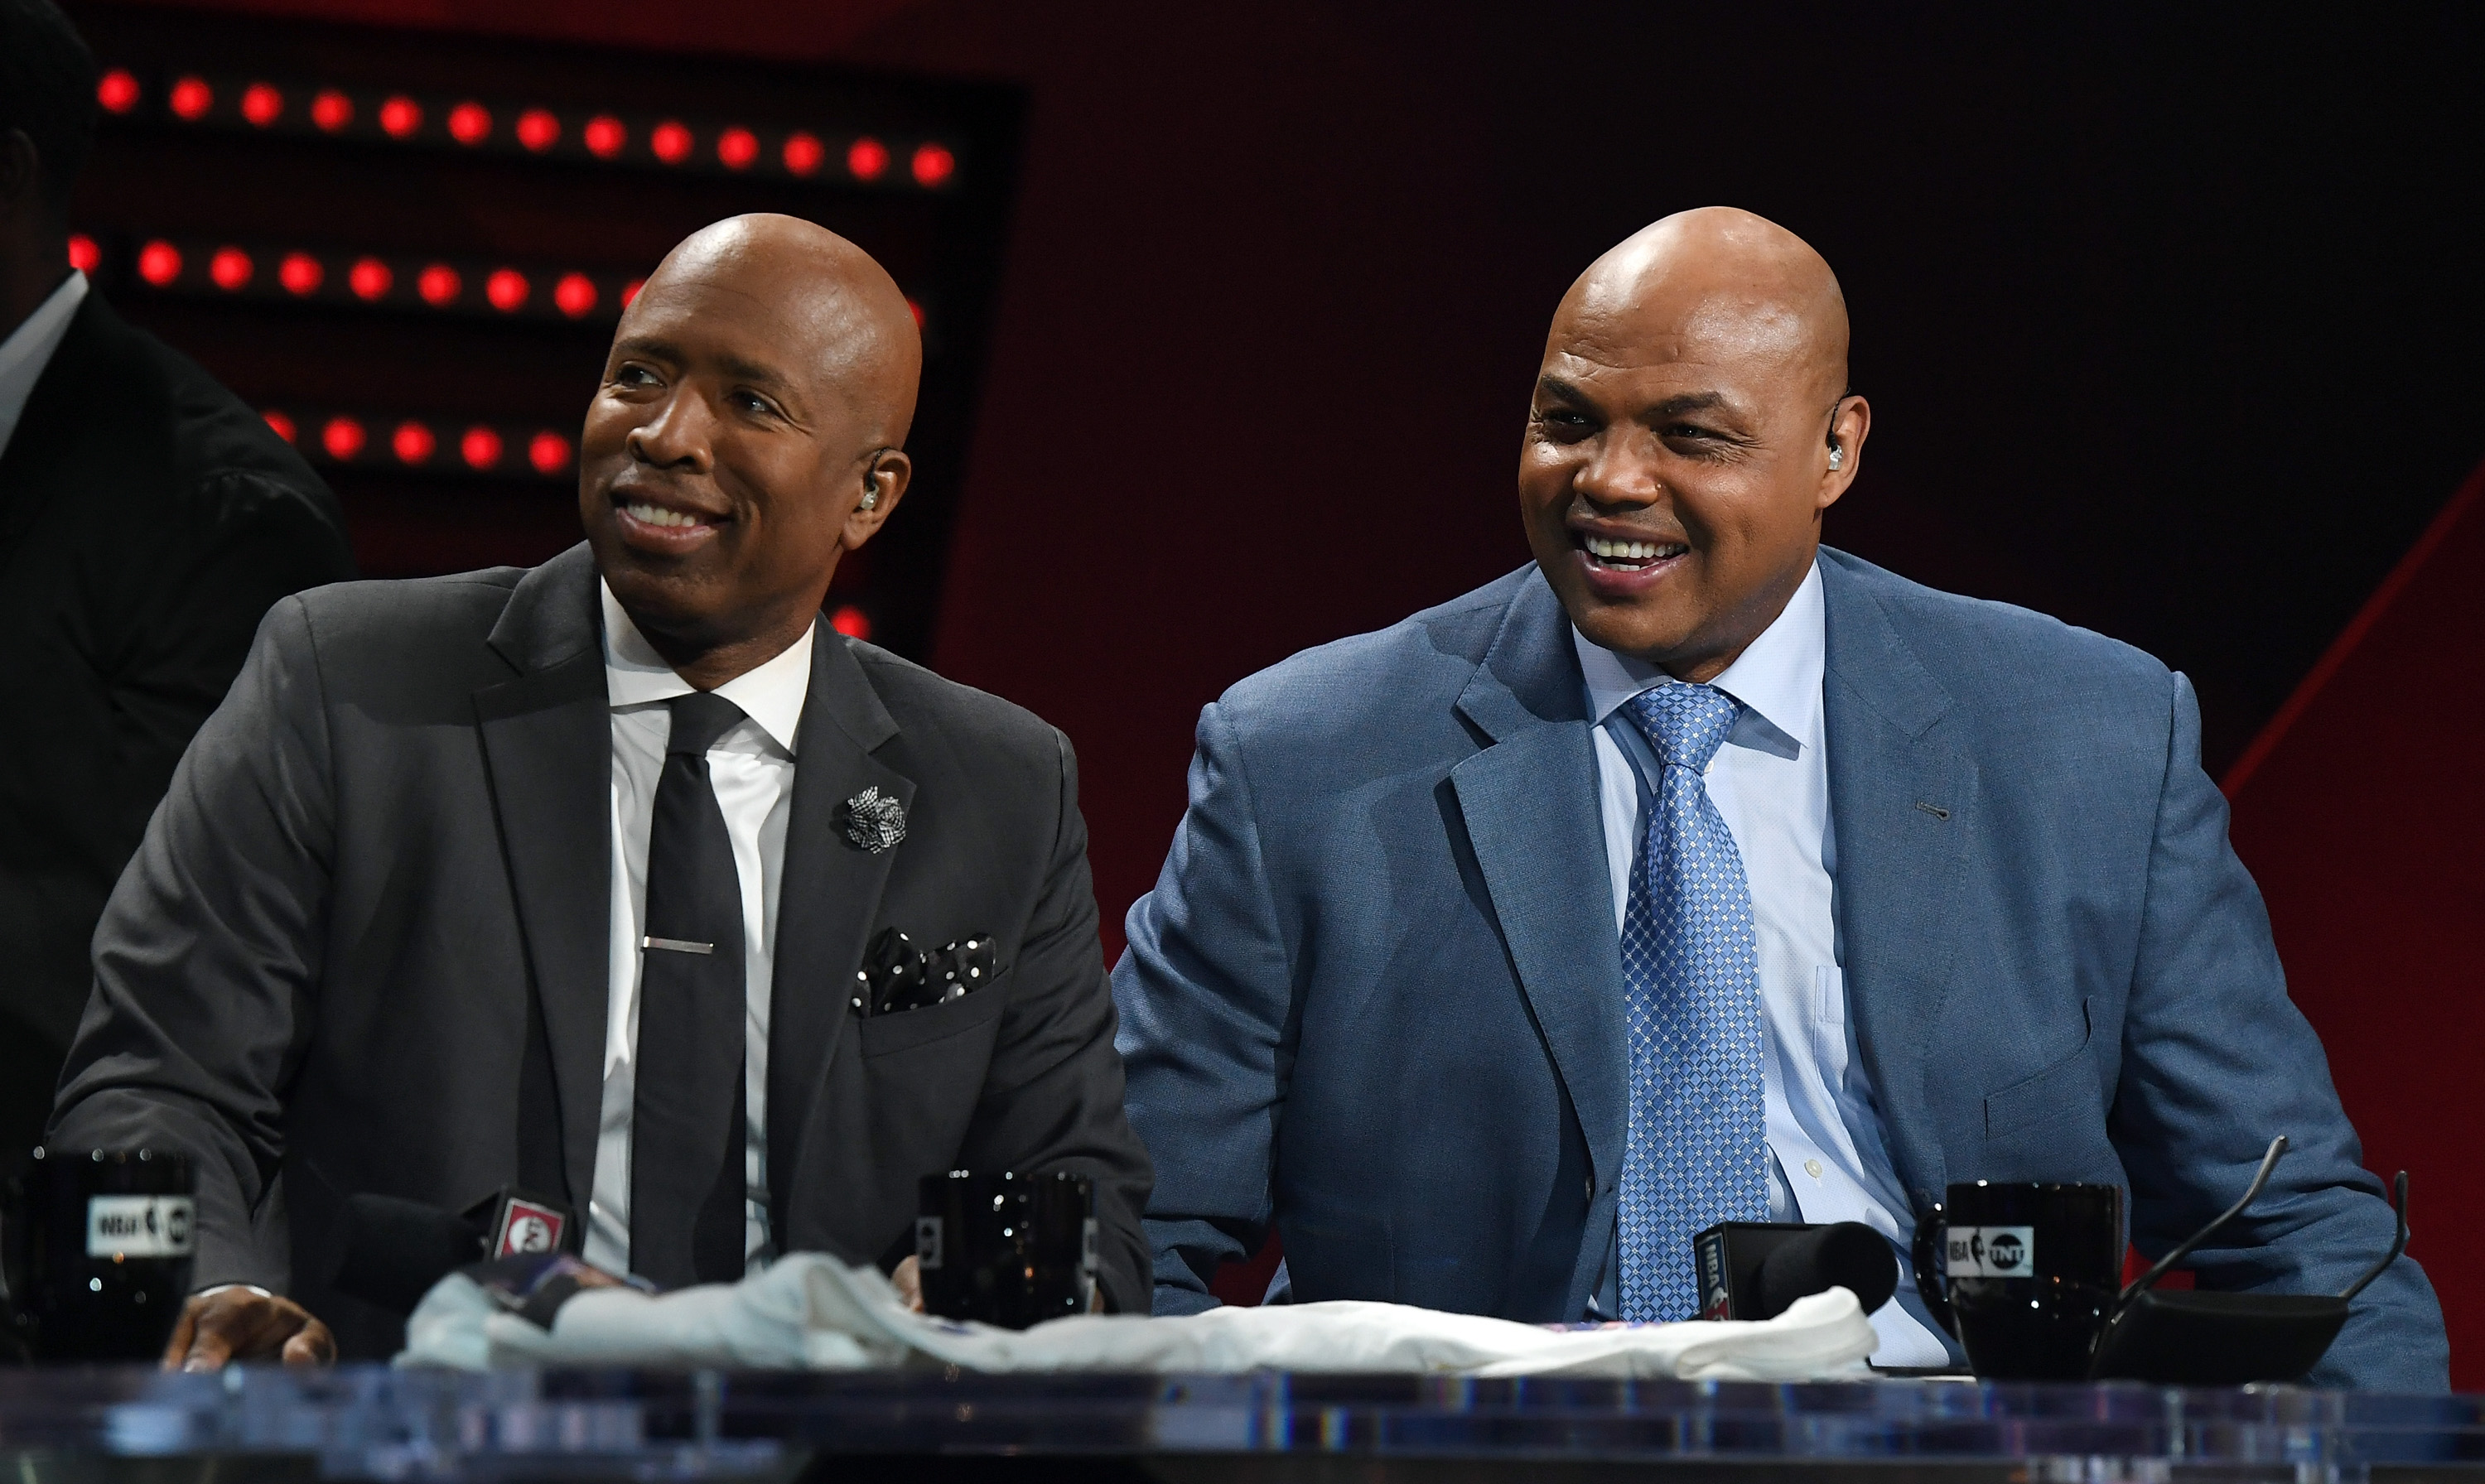 Charles Barkley and Kenny Smith during a live telecast of "NBA on TNT" in 2017